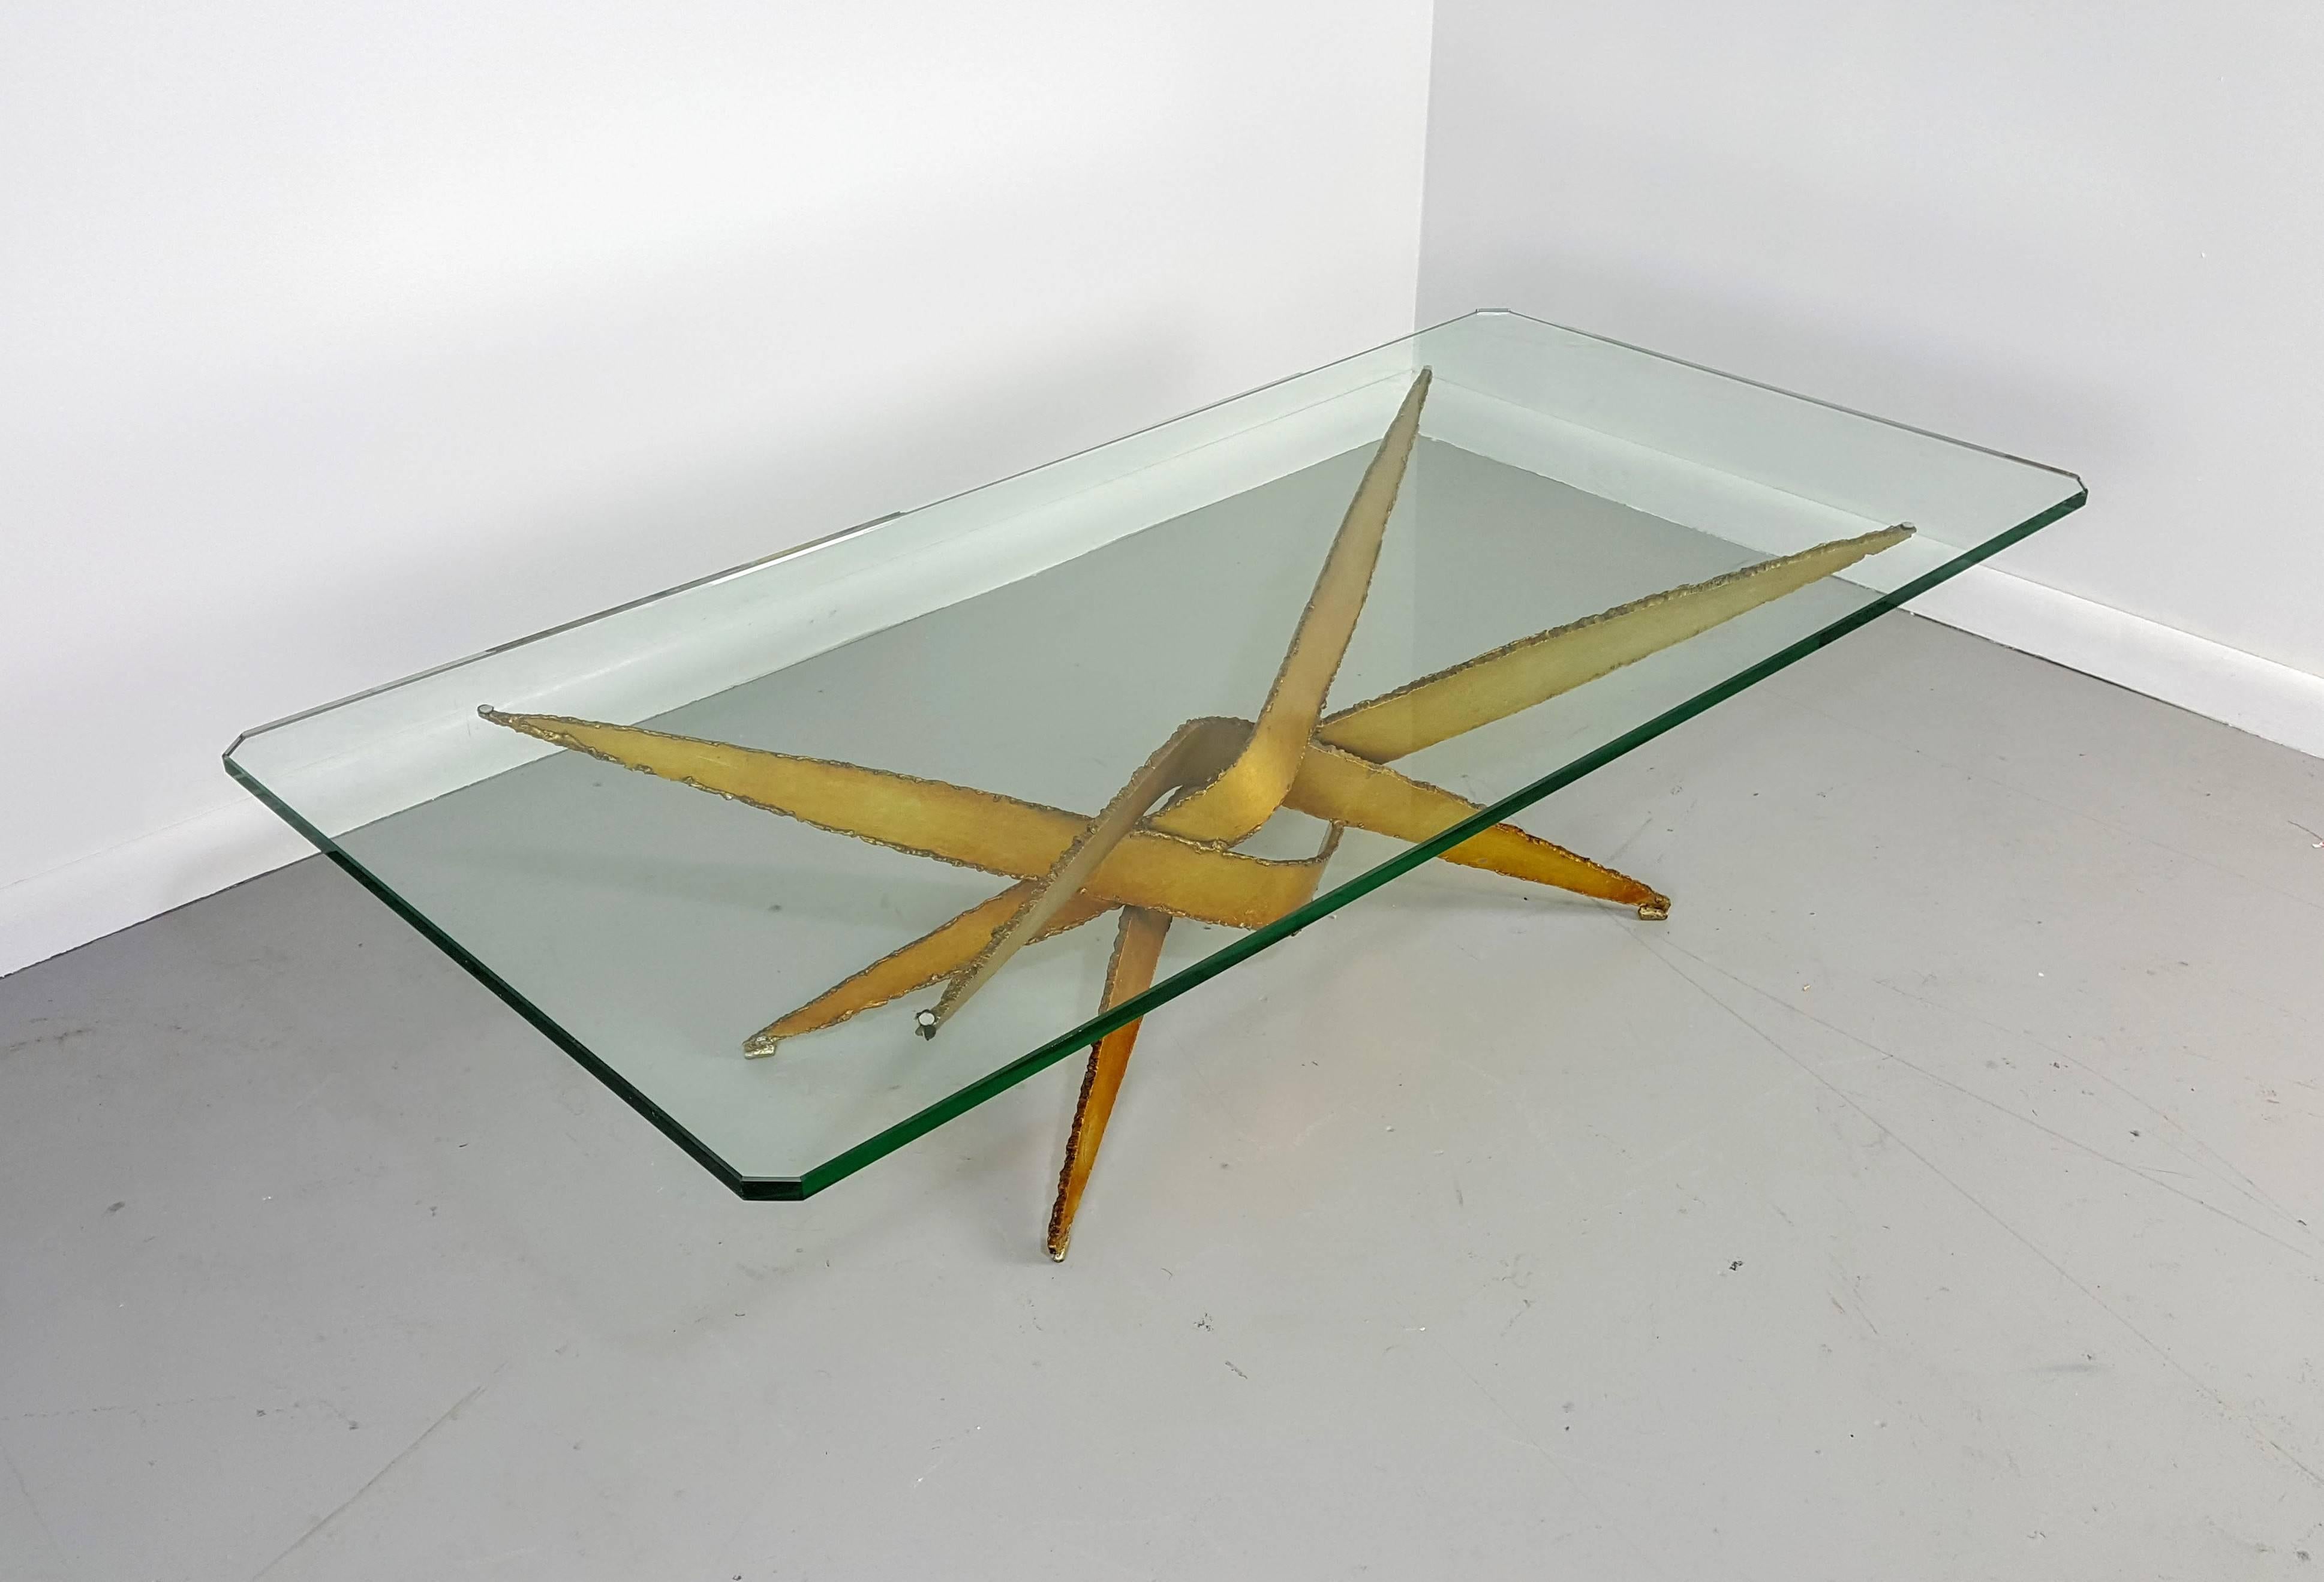 Torch cut and welded steel Brutalist coffee table, Mexico, 1970s.

We offer free regular deliveries to NYC and Philadelphia area. Delivery to DC, MD, CT and MA are available if schedule permits, please message for a location-based delivery quote.